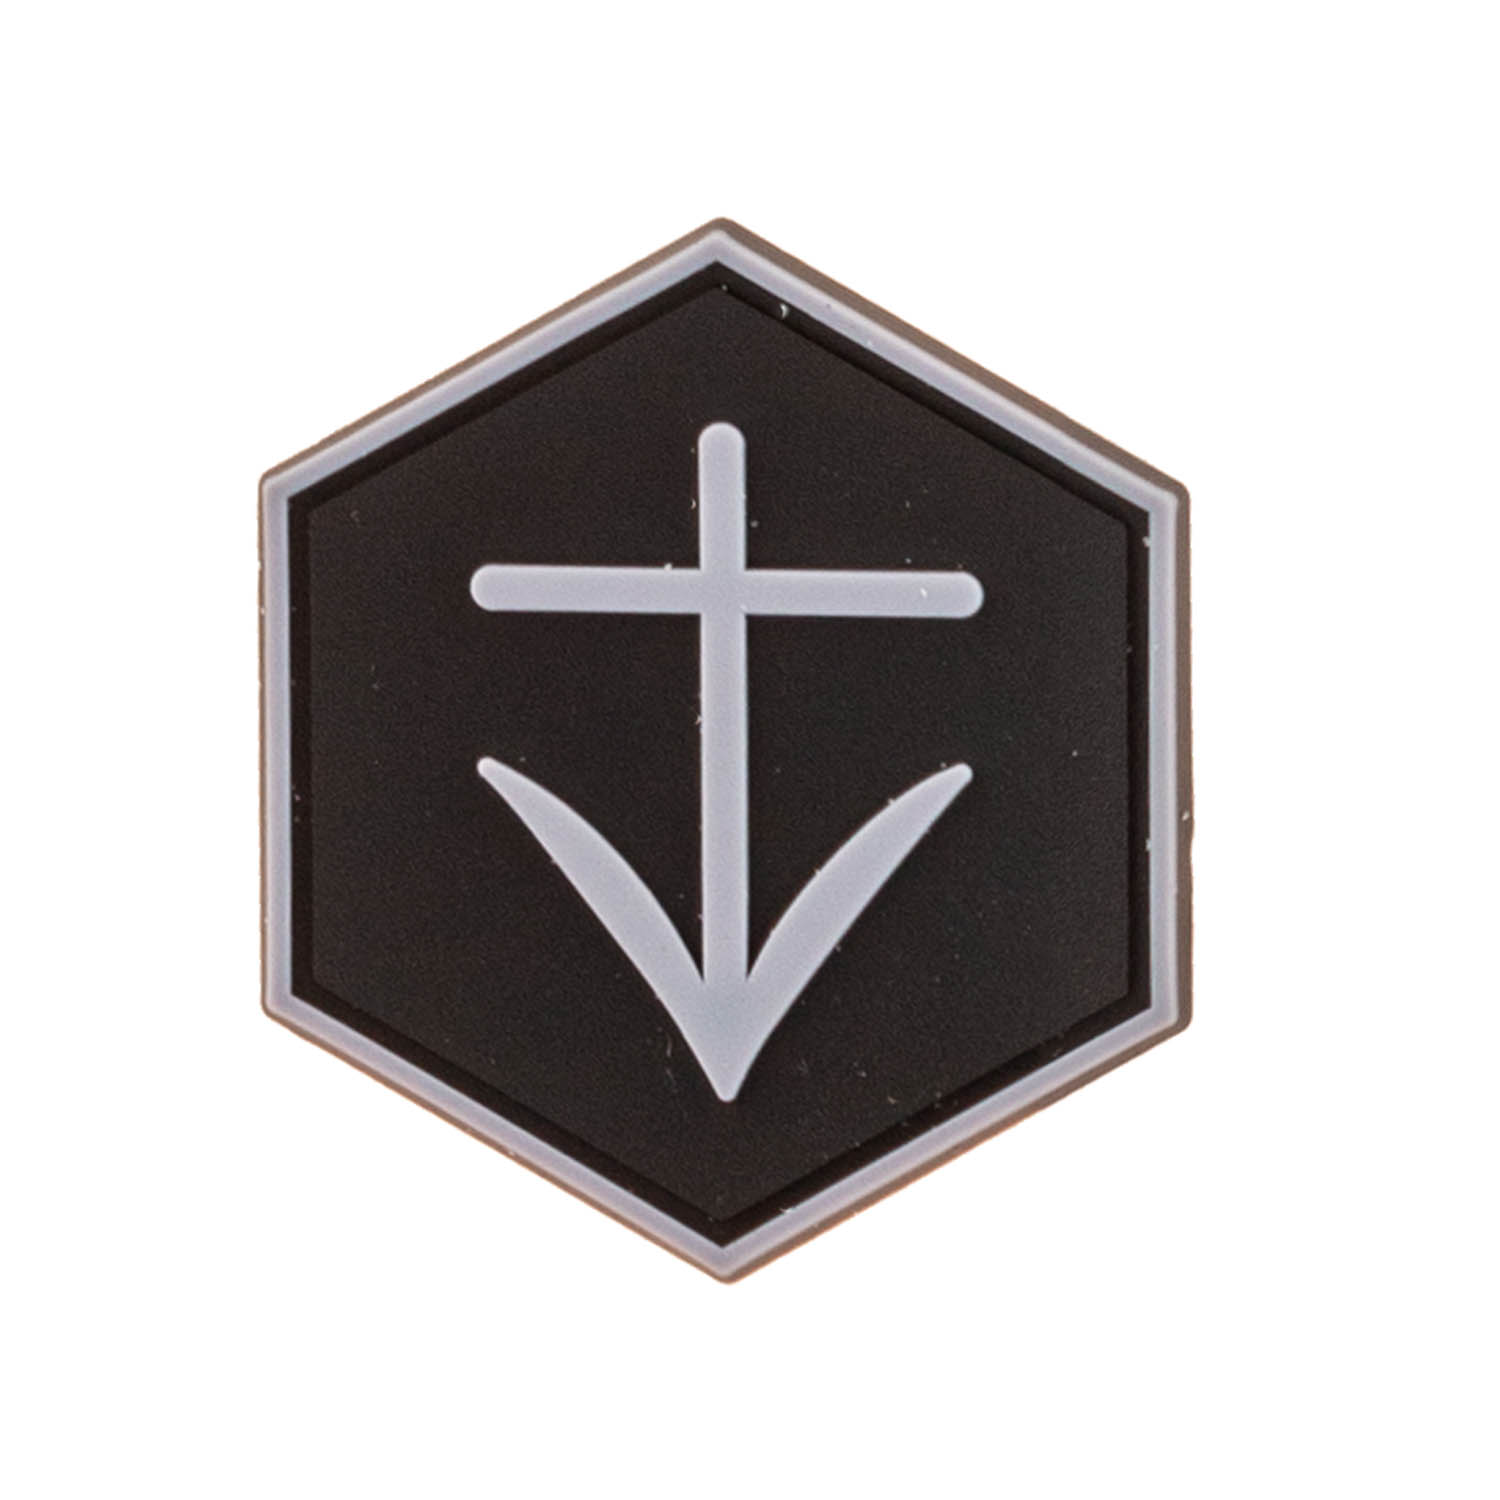 PAT0123 Patch Sentinel Gear SIGNE ASTRAL 2 series - PAT0123